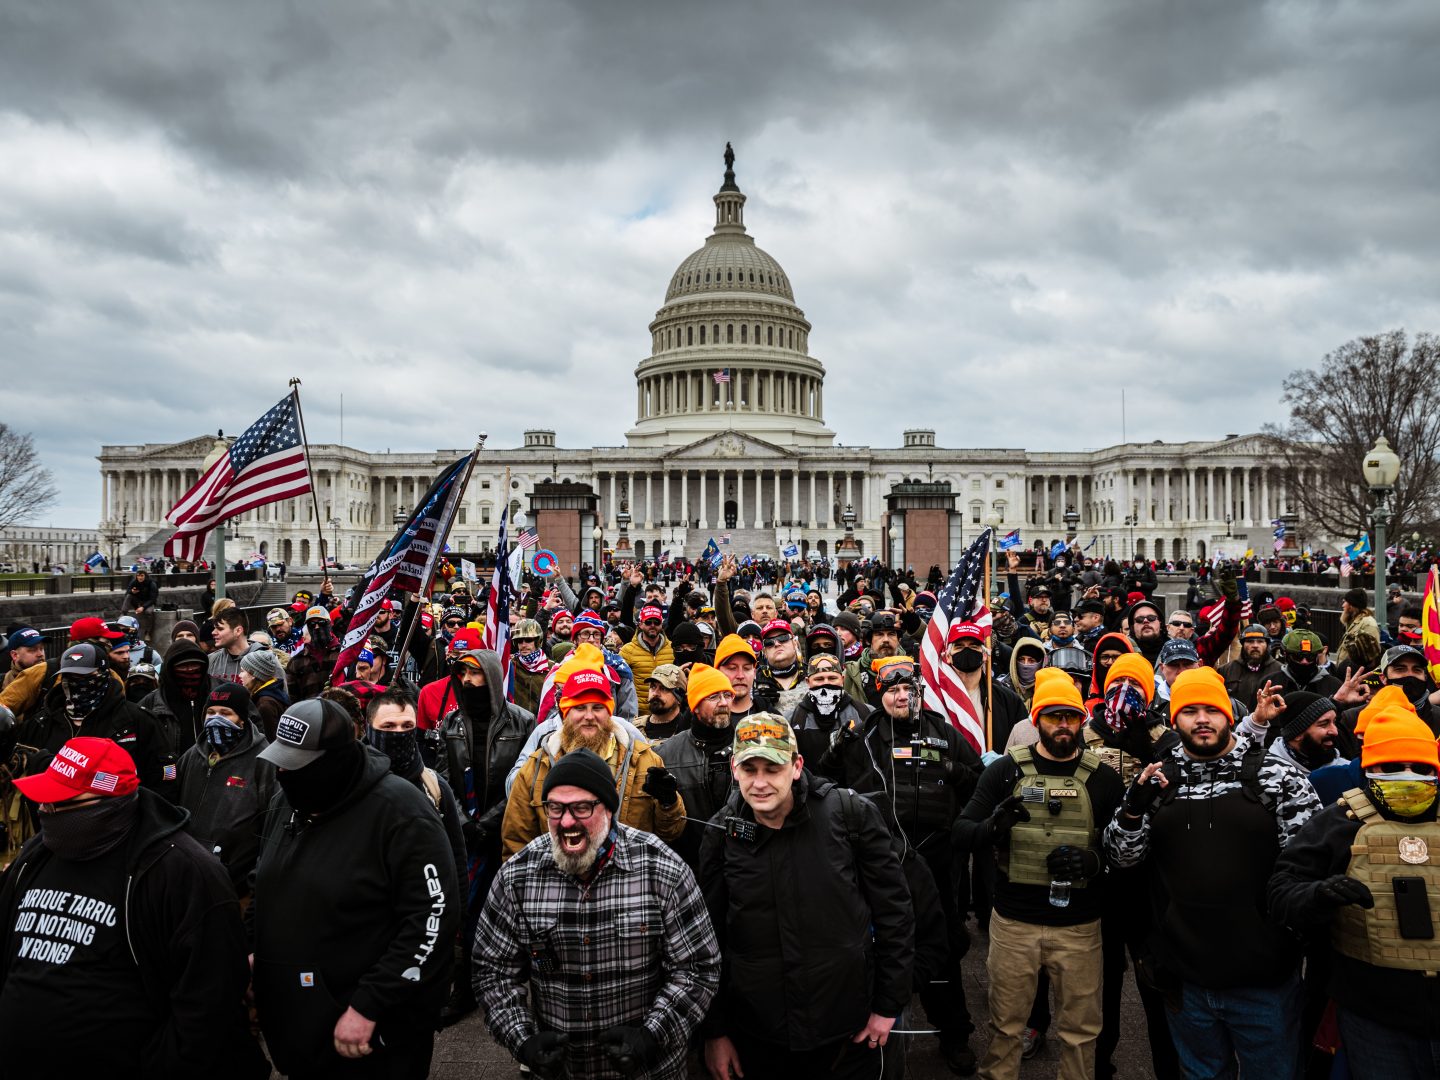 WASHINGTON, DC - JANUARY 06: Pro-Trump protesters gather in front of the U.S. Capitol Building on January 6, 2021 in Washington, DC. A pro-Trump mob stormed the Capitol, breaking windows and clashing with police officers. Trump supporters gathered in the nation's capital today to protest the ratification of President-elect Joe Biden's Electoral College victory over President Trump in the 2020 election.